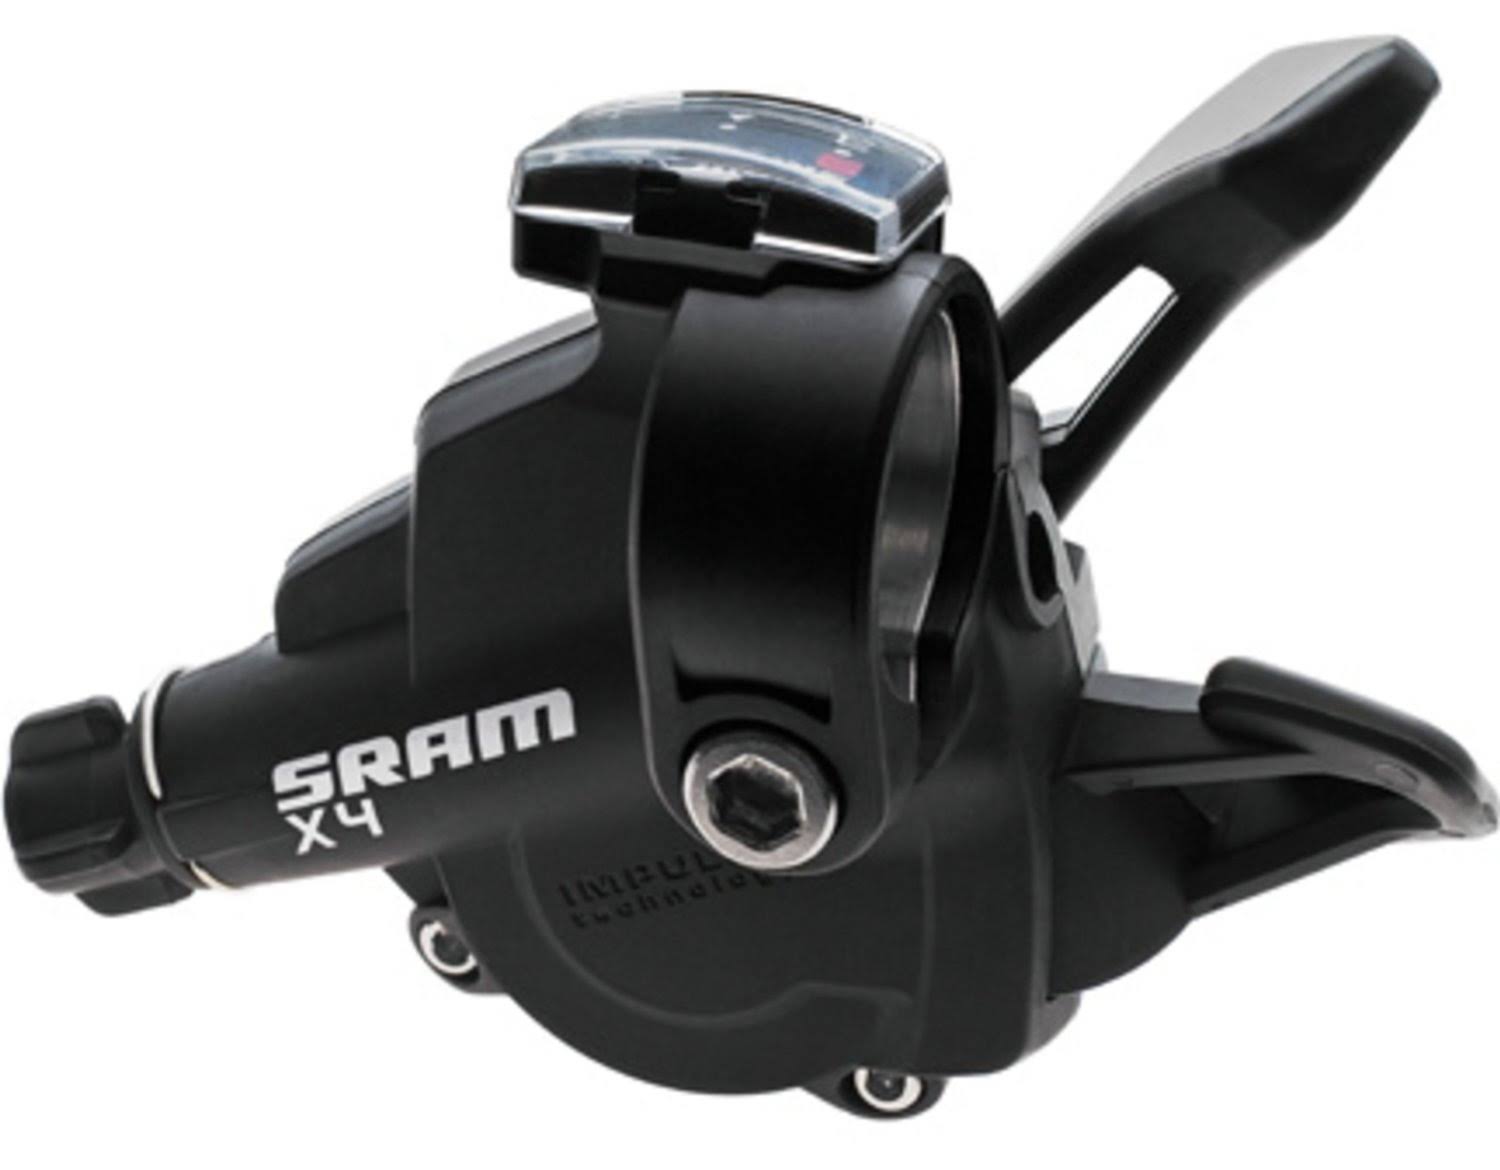 Sram X3/X4 Trigger Front Mountain Bicycle Shifter